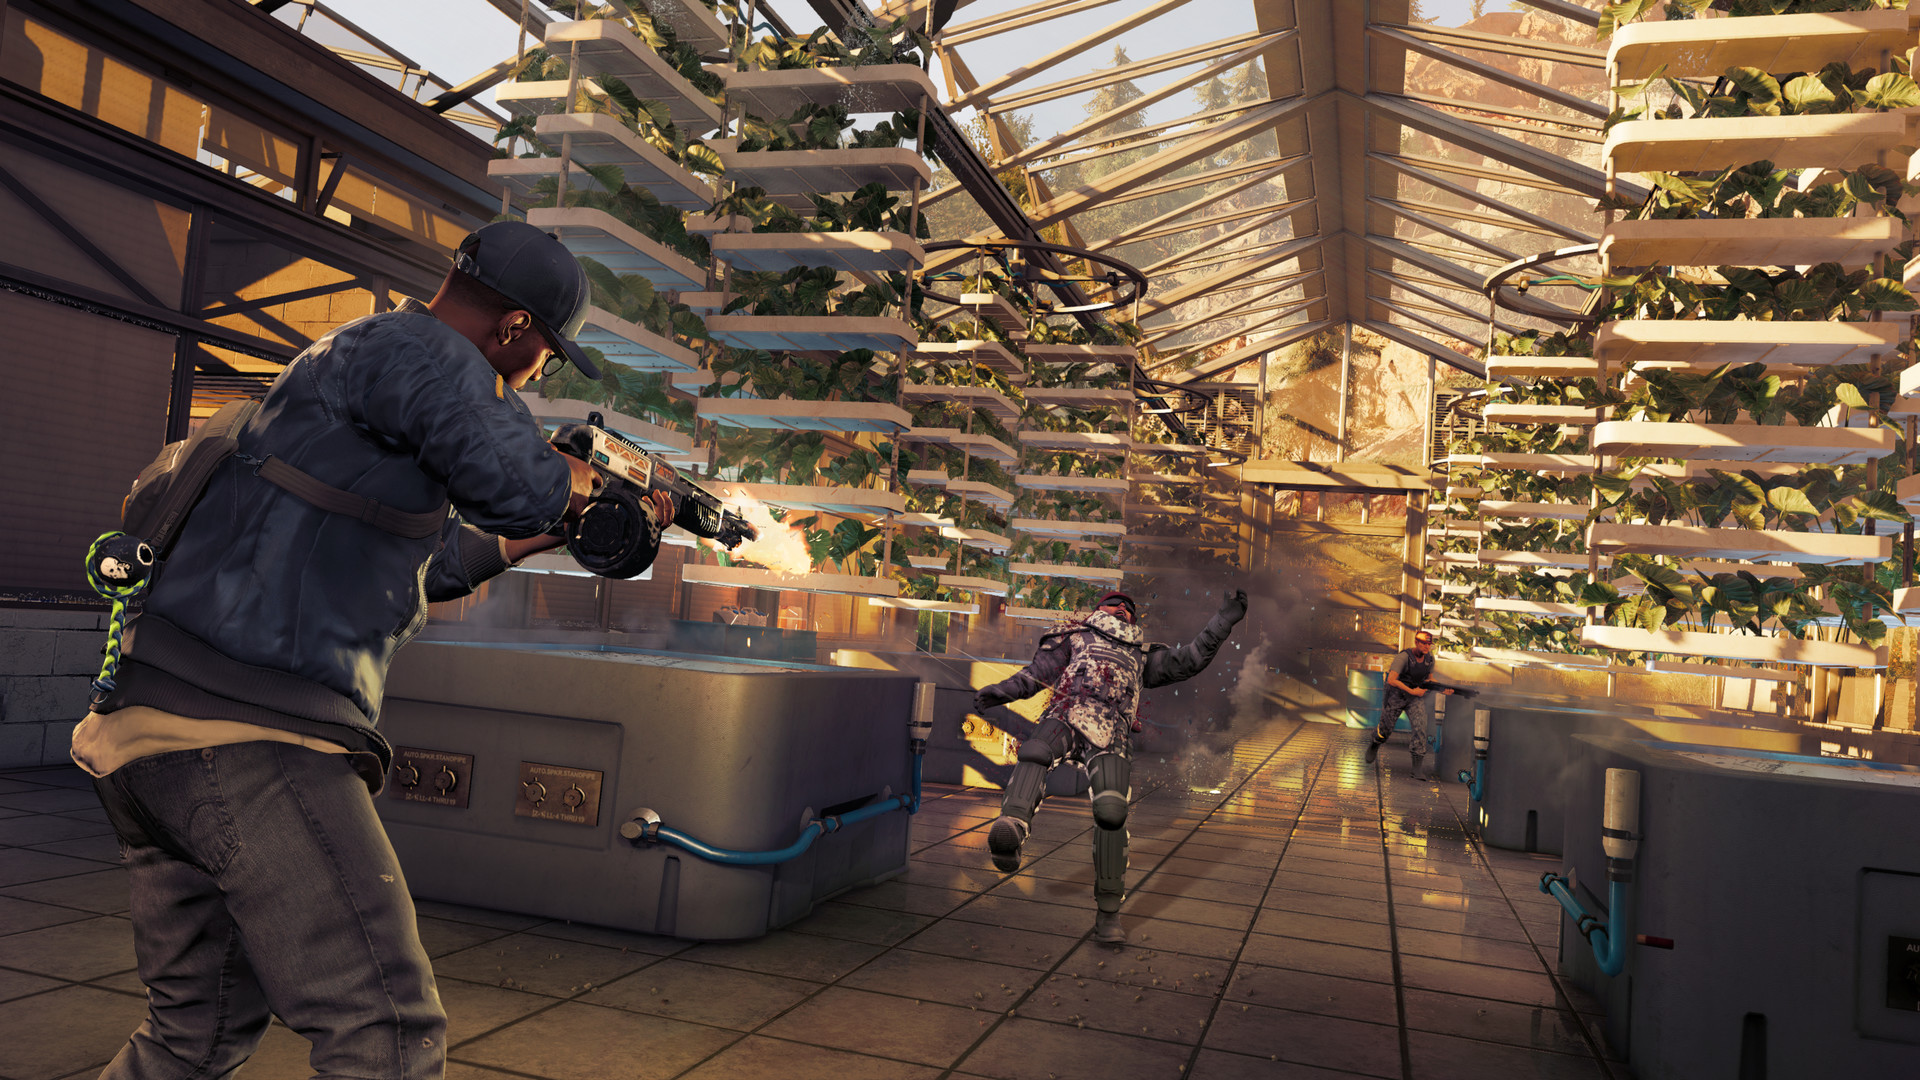 Watch_Dogs® 2 on Steam